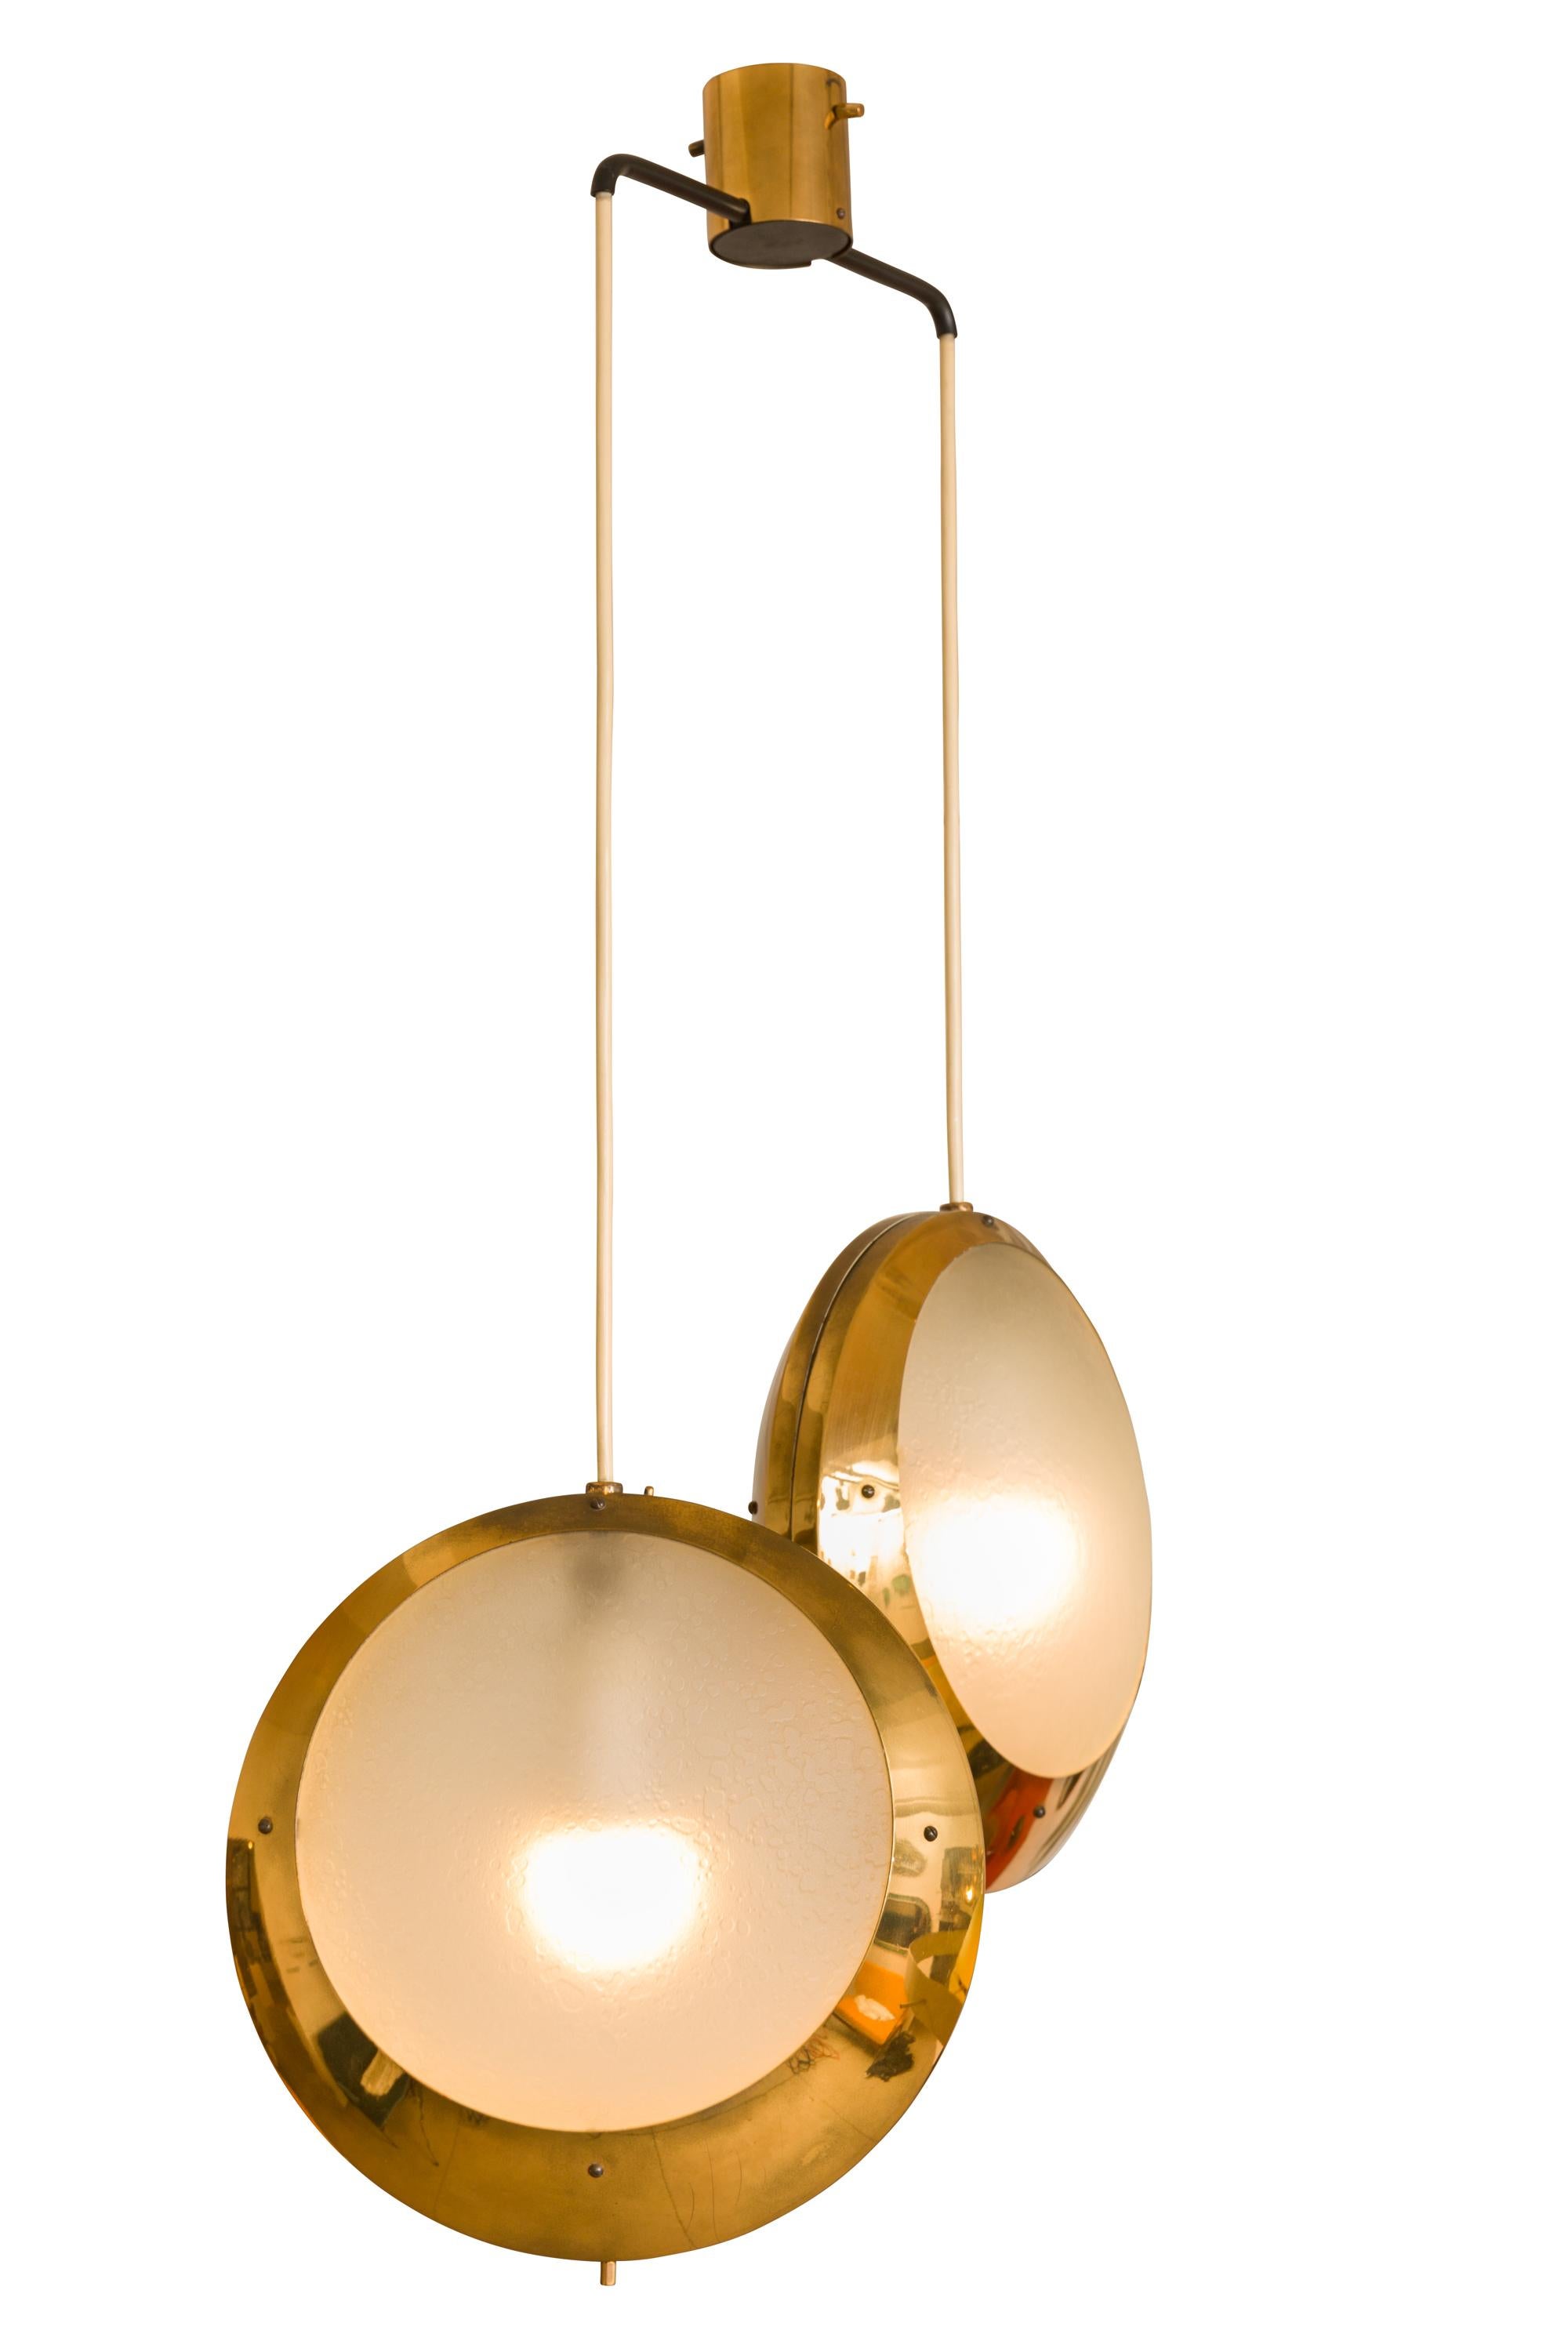 A rare and striking double pendant light by Stilnovo. The glass has a wonderful textured surface that diffuses the light and creates an additional appealing quality.